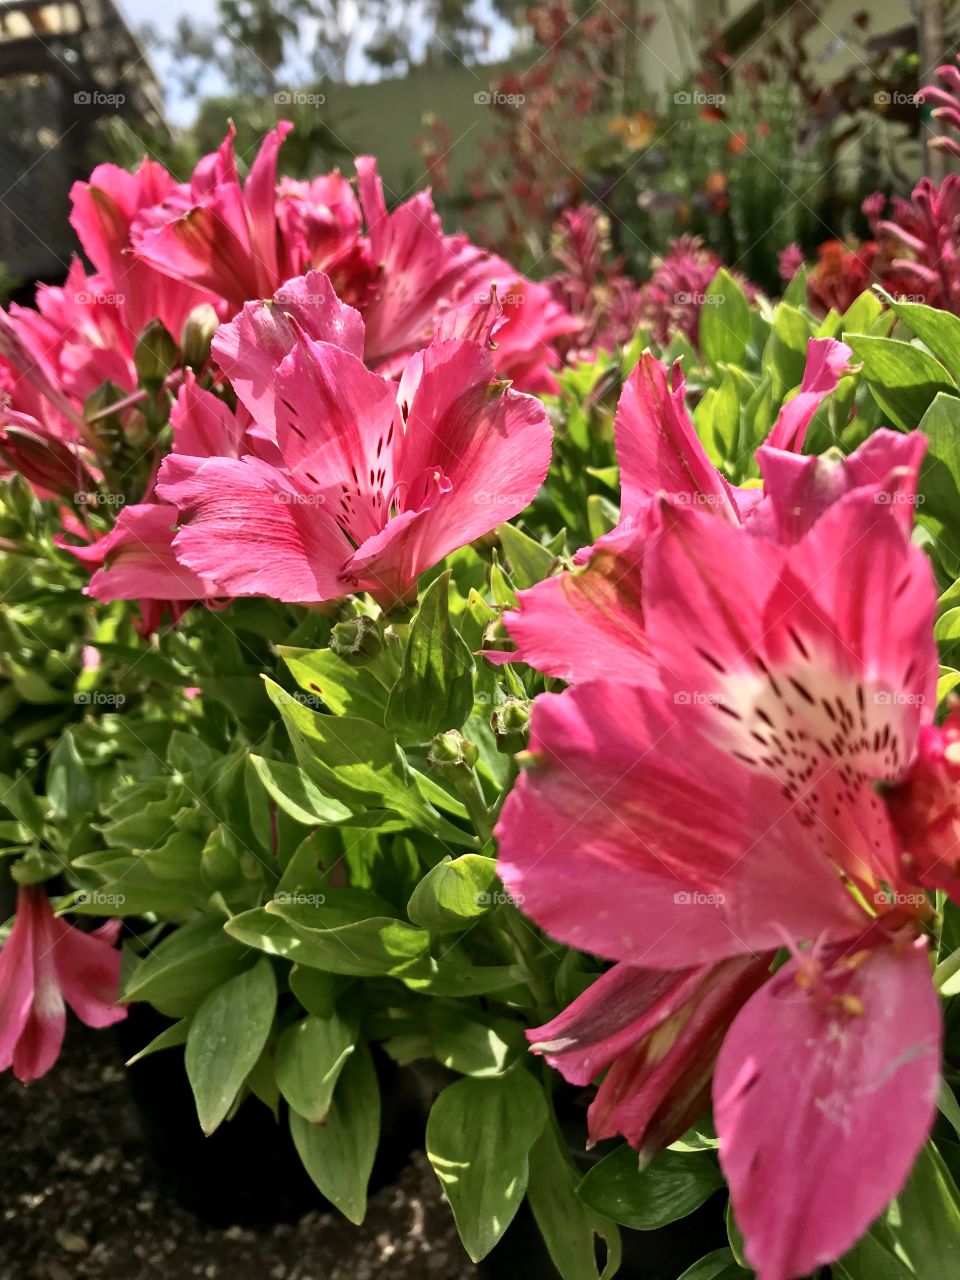 Alstroemeria, commonly called the Peruvian lily or lily of the Incas, is a genus of flowering plants in the family Alstroemeriaceae. 2/2